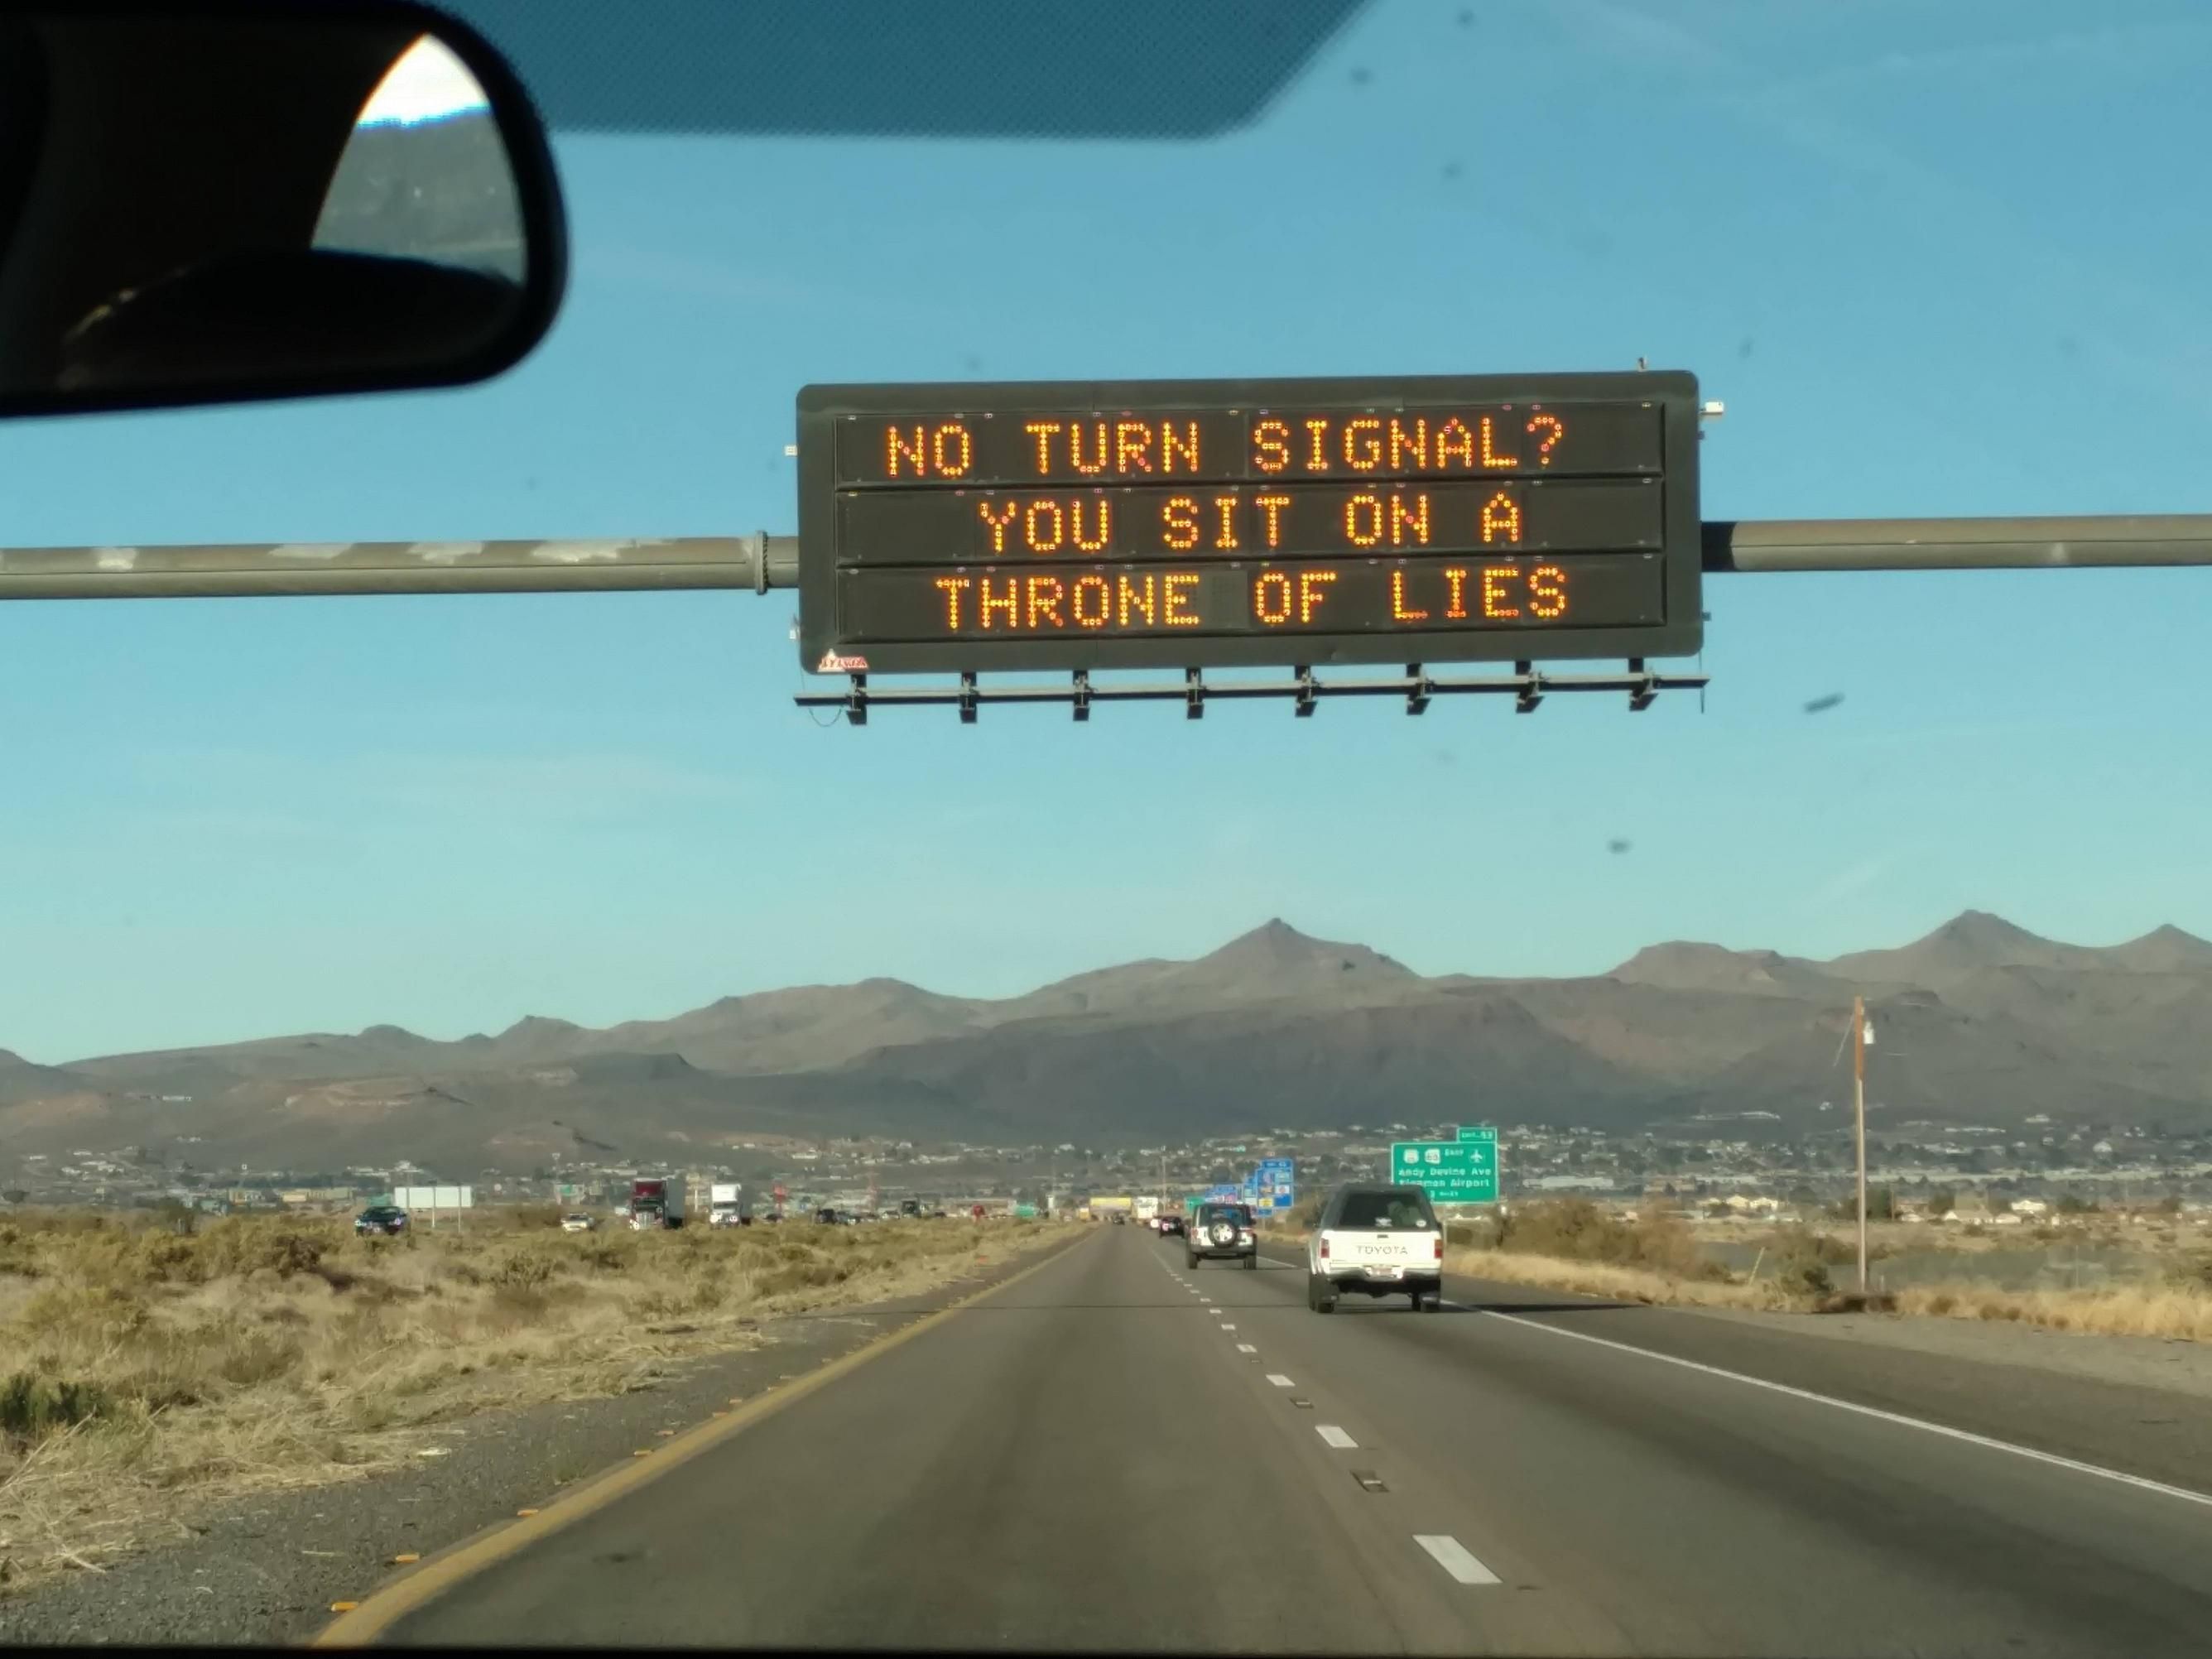 This message sign in Arizona today...